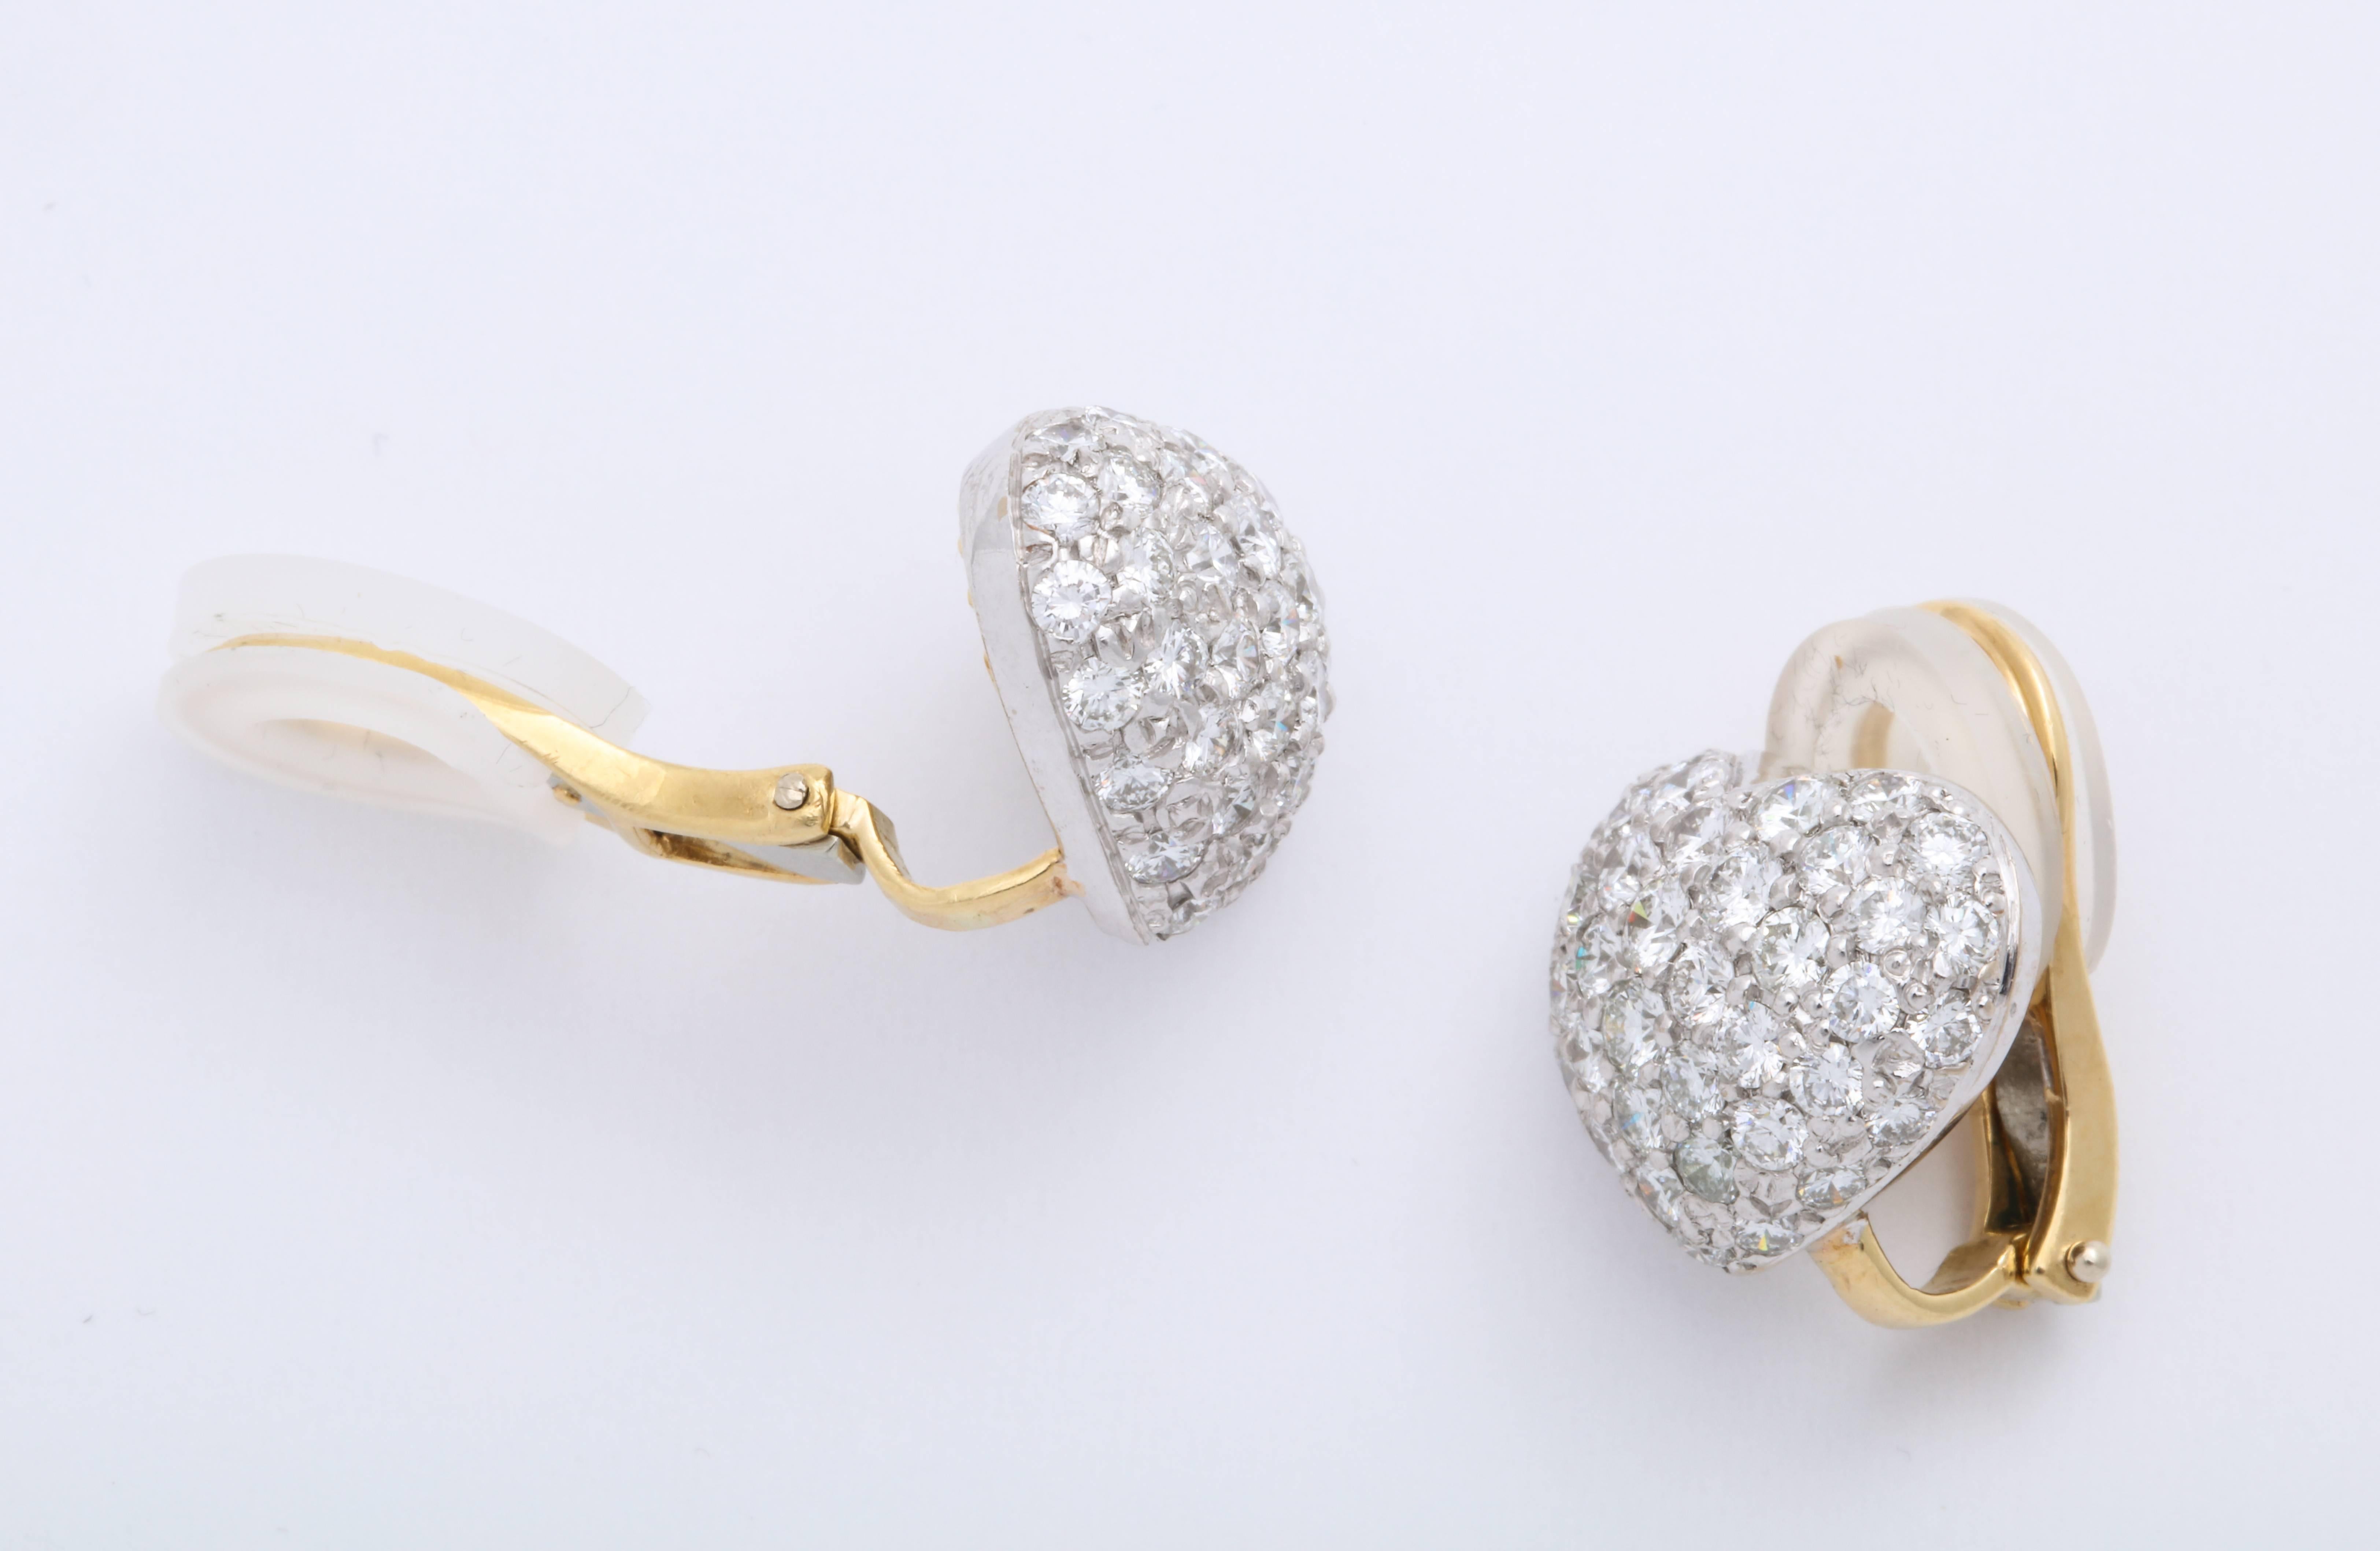 These beautiful domed diamond pave 18 Karat white and yellow gold heart shape earrings are decorated with 4.02 carats of colorless round brilliant-cut diamonds and are set in 18 Karat yellow gold air-line foundation with French clips.

